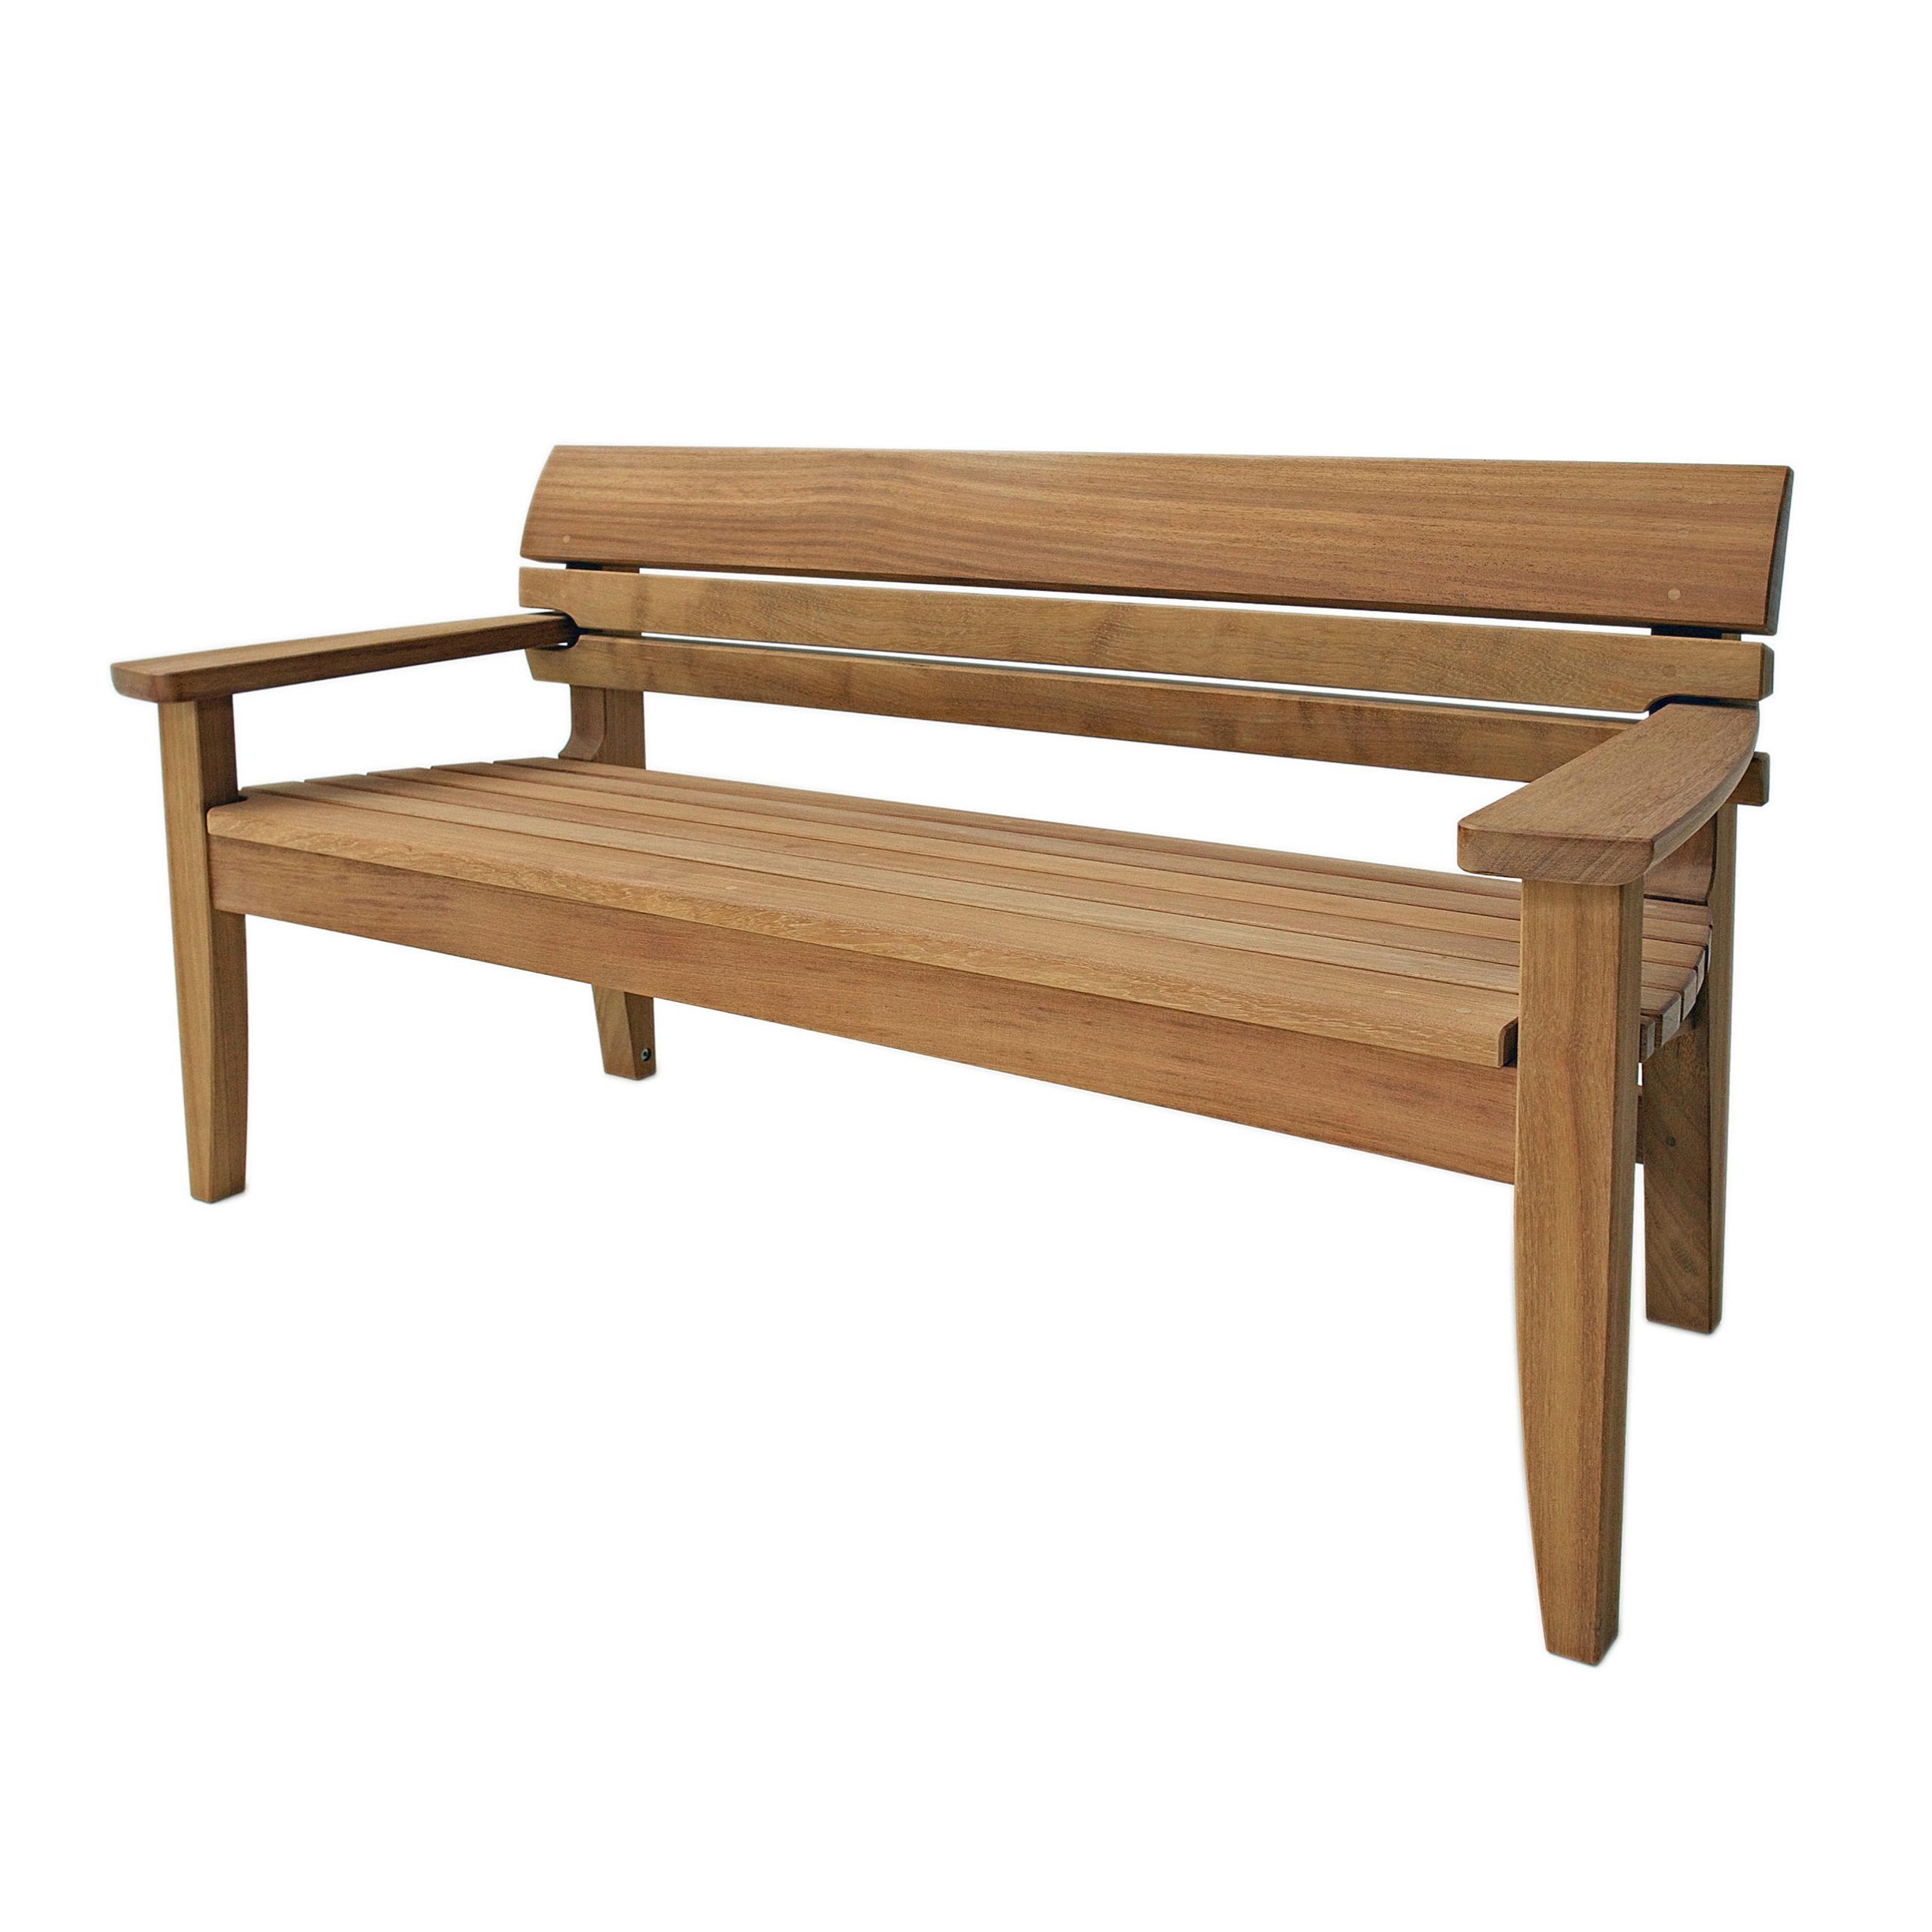 Best And Newest Pauls Steel Garden Benches Inside Chico Full Bench & Designer Furniture (View 16 of 30)